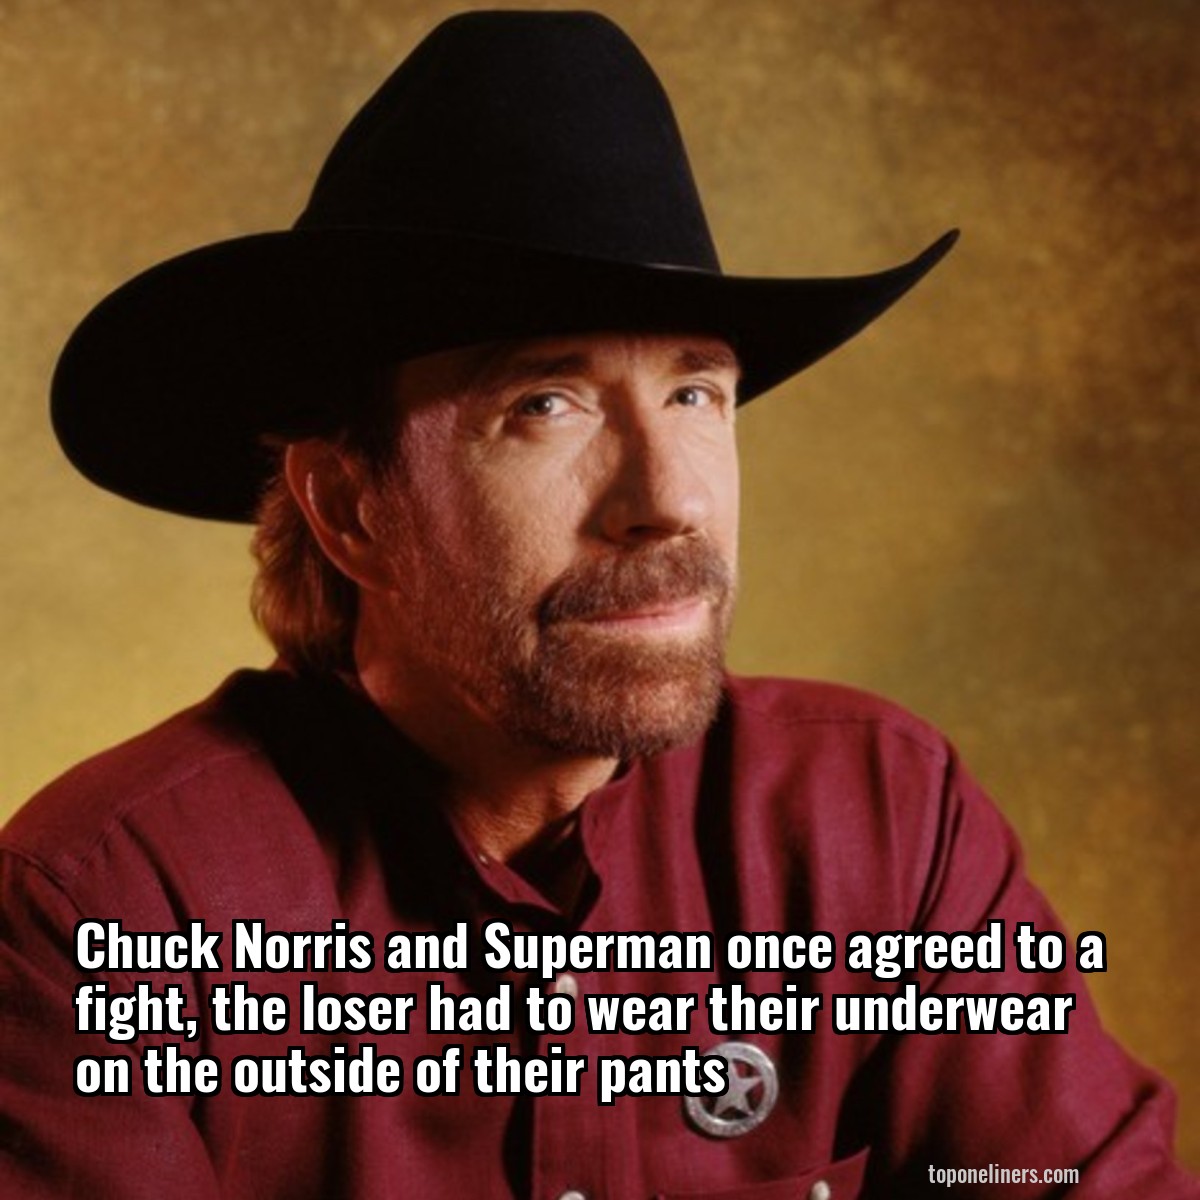 Chuck Norris and Superman once agreed to a fight, the loser had to wear their underwear on the outside of their pants